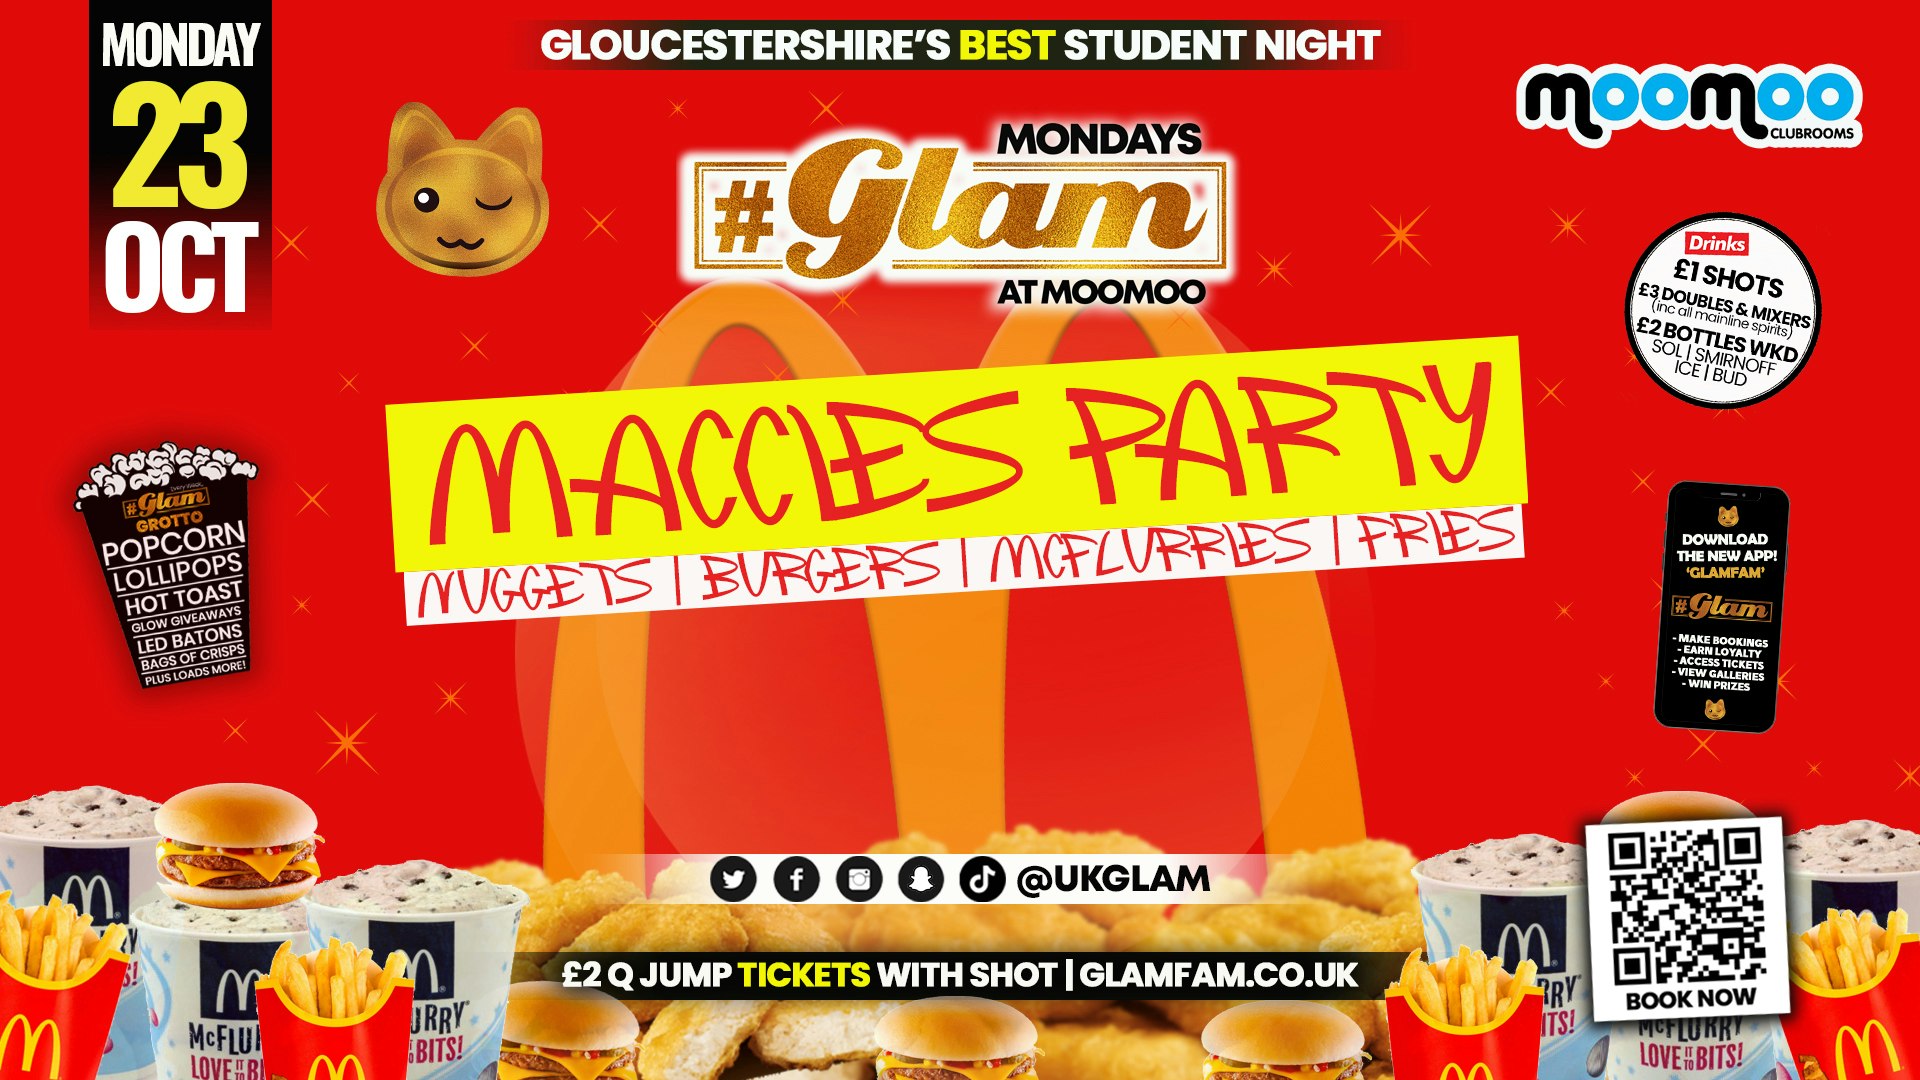 😋 TONIGHT 😋 Glam Cheltenham – Maccies Takeover! – Gloucestershire’s Best Student Events